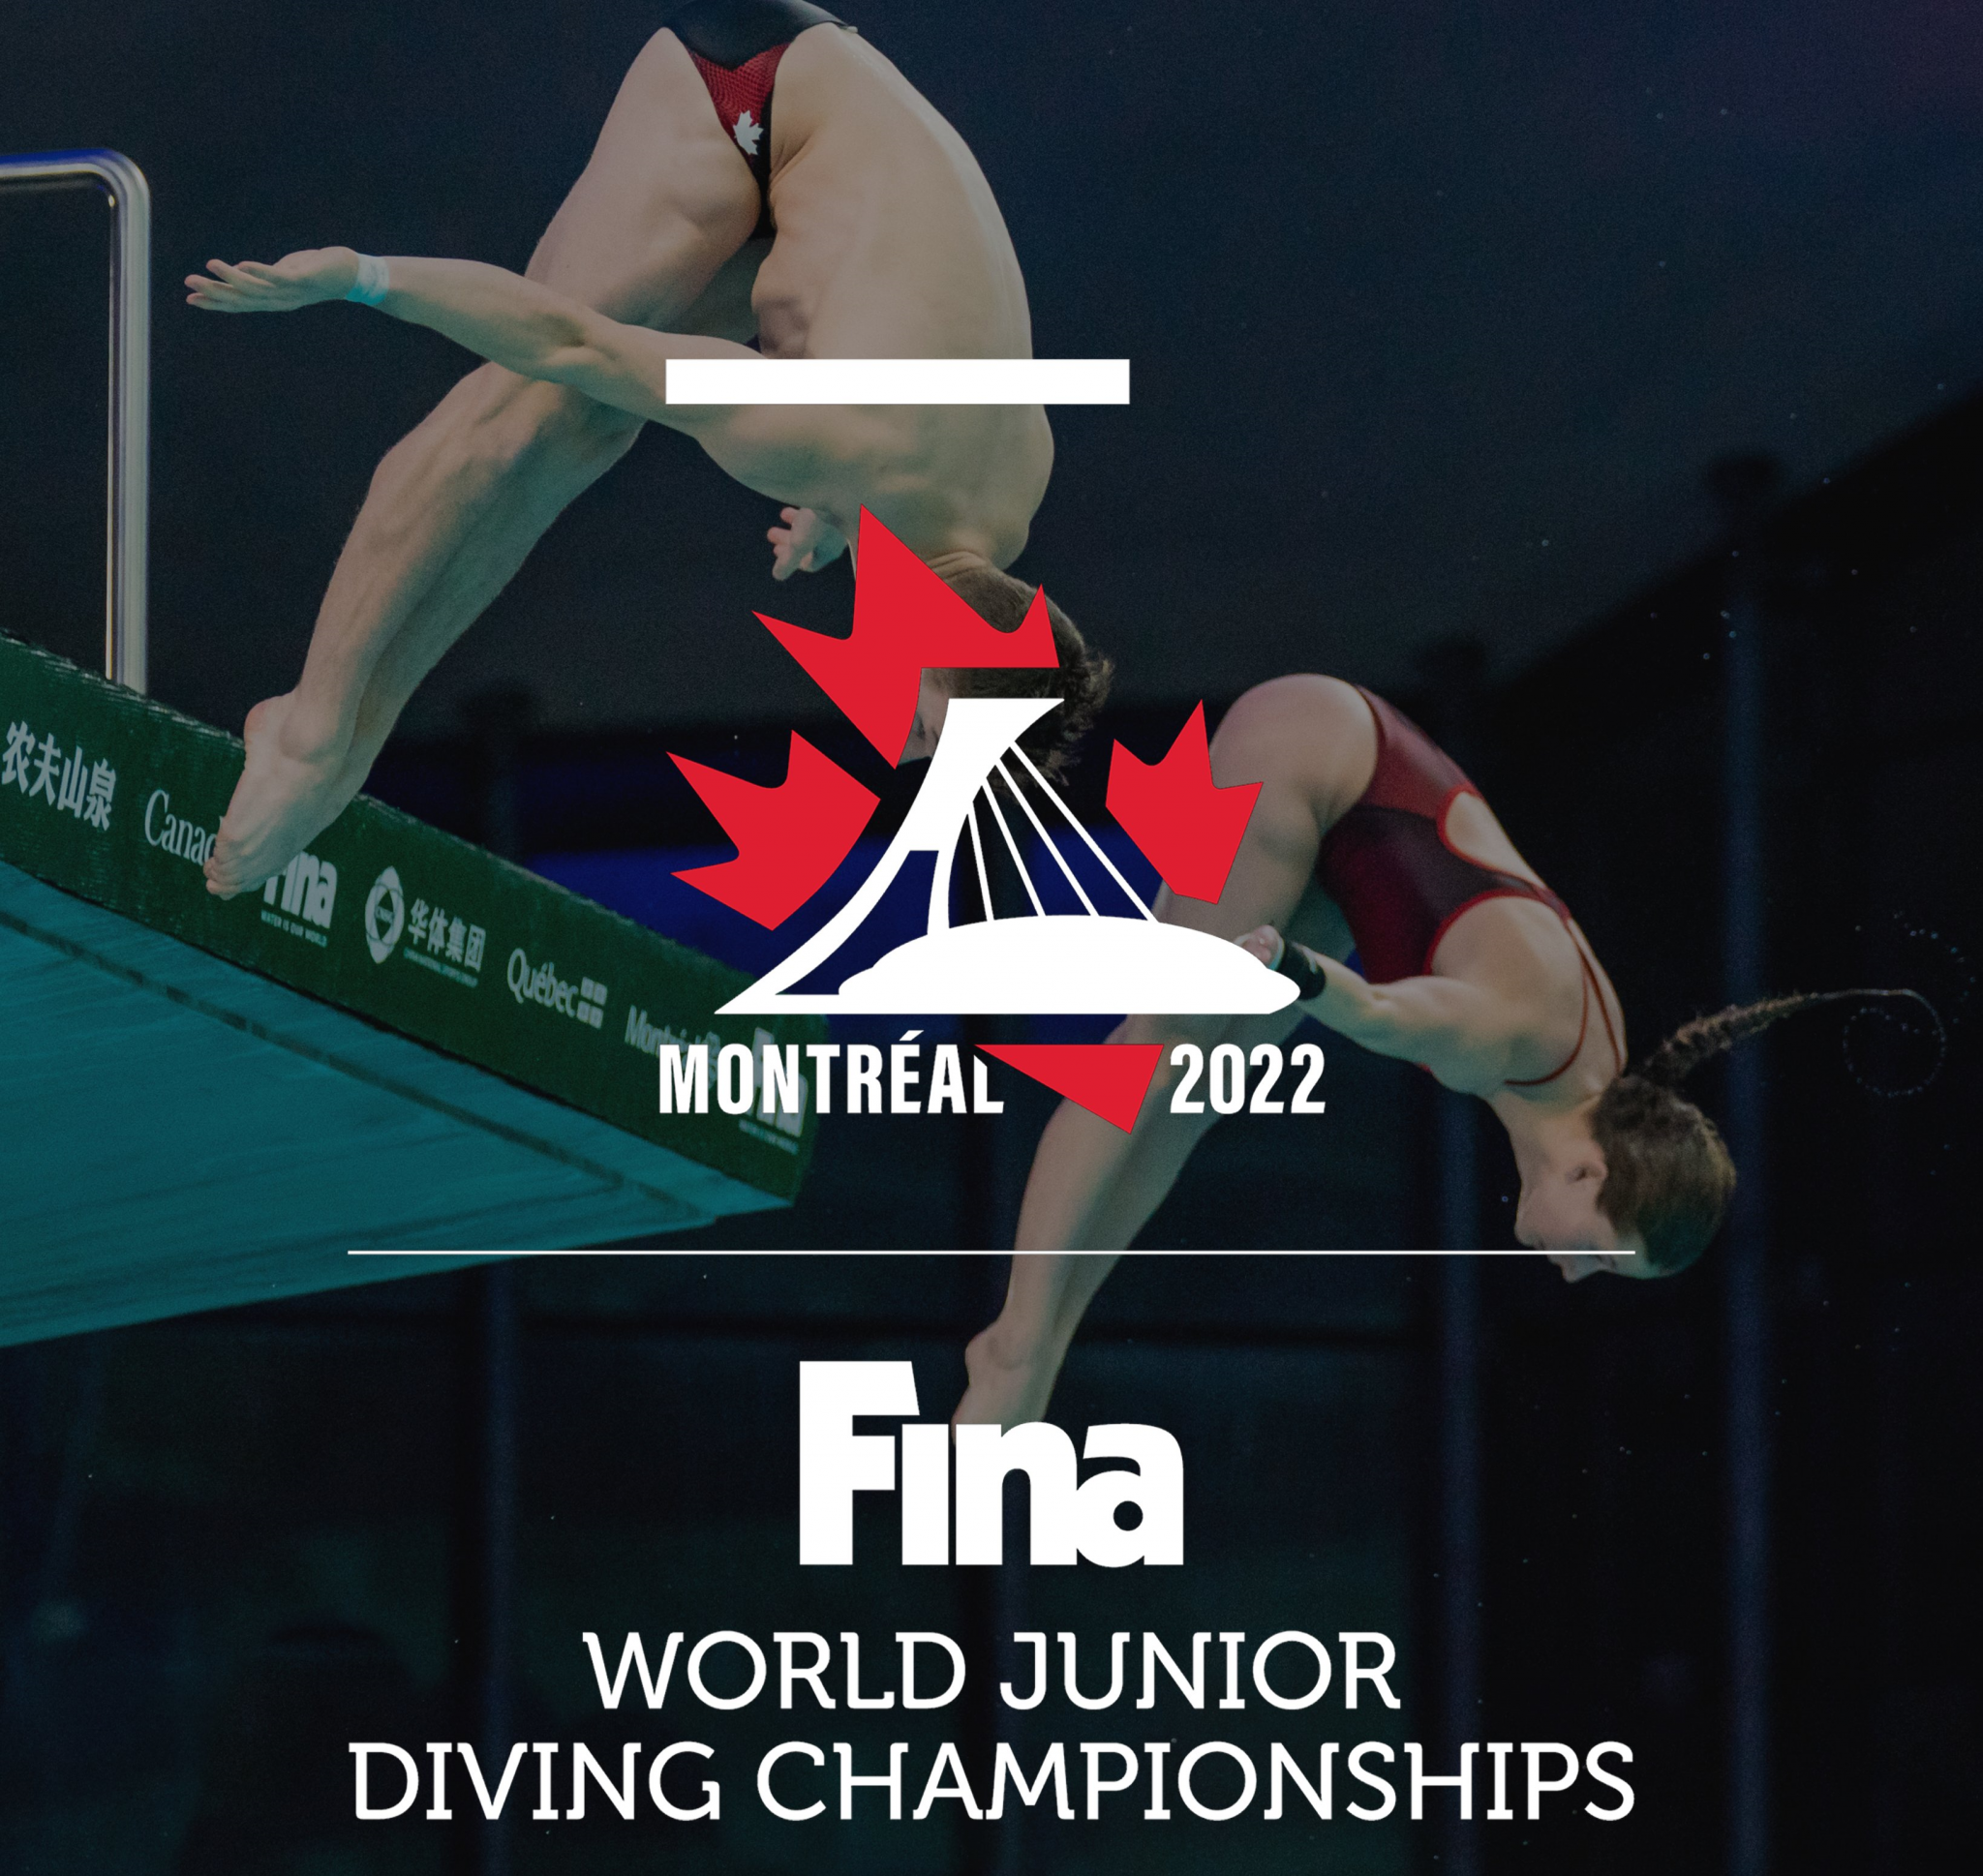 Montreal named as host of 2022 FINA World Junior Diving Championships